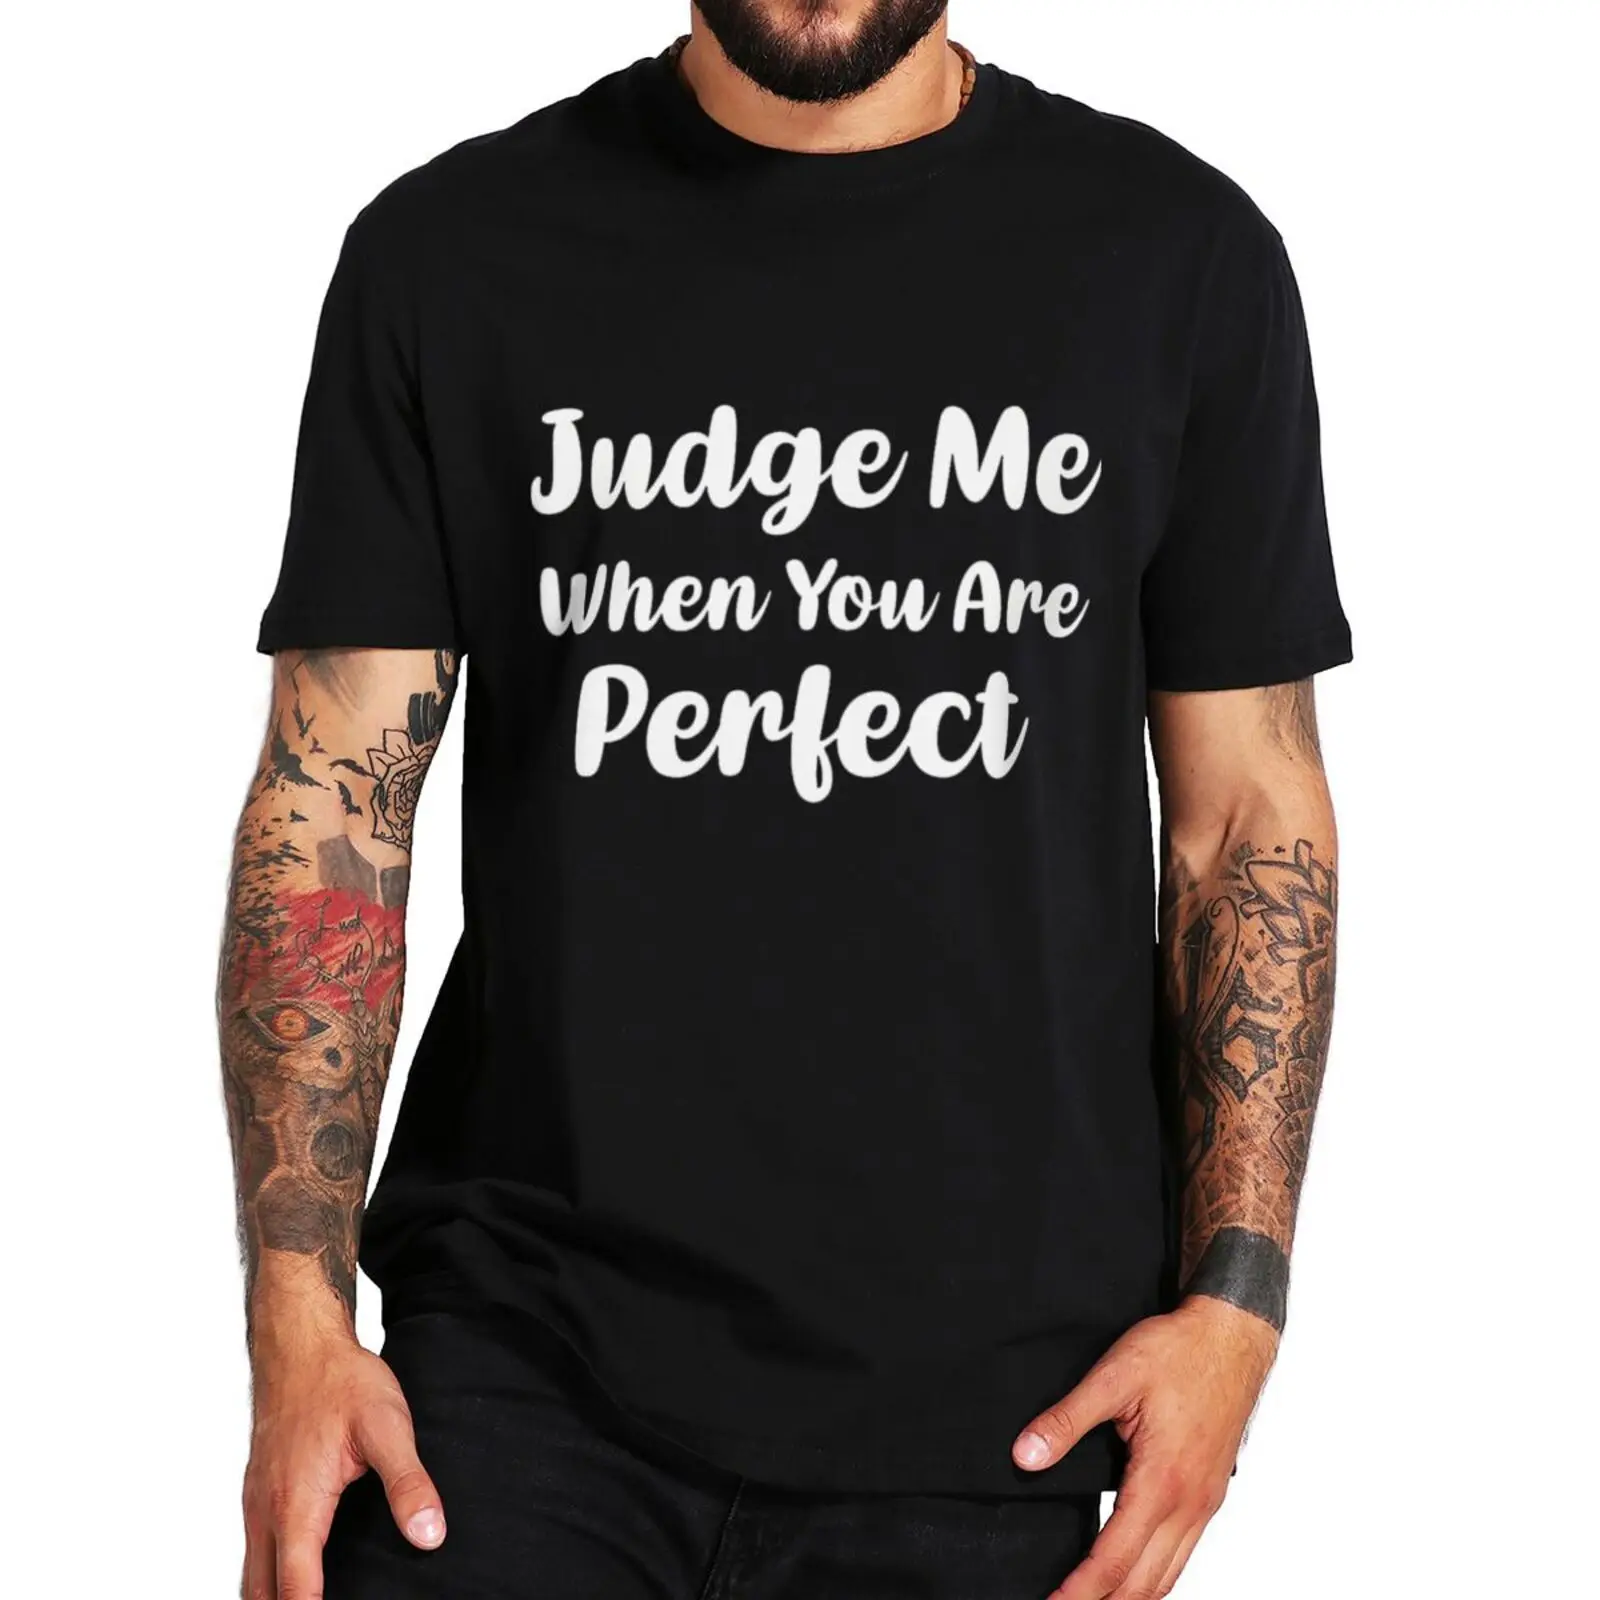 

Judge Me When You Are Perfect T Shirt Funny Sayings Sarcastic Humor Jokes Gift Tee Tops Summer Casual Cotton Unisex T-shirts